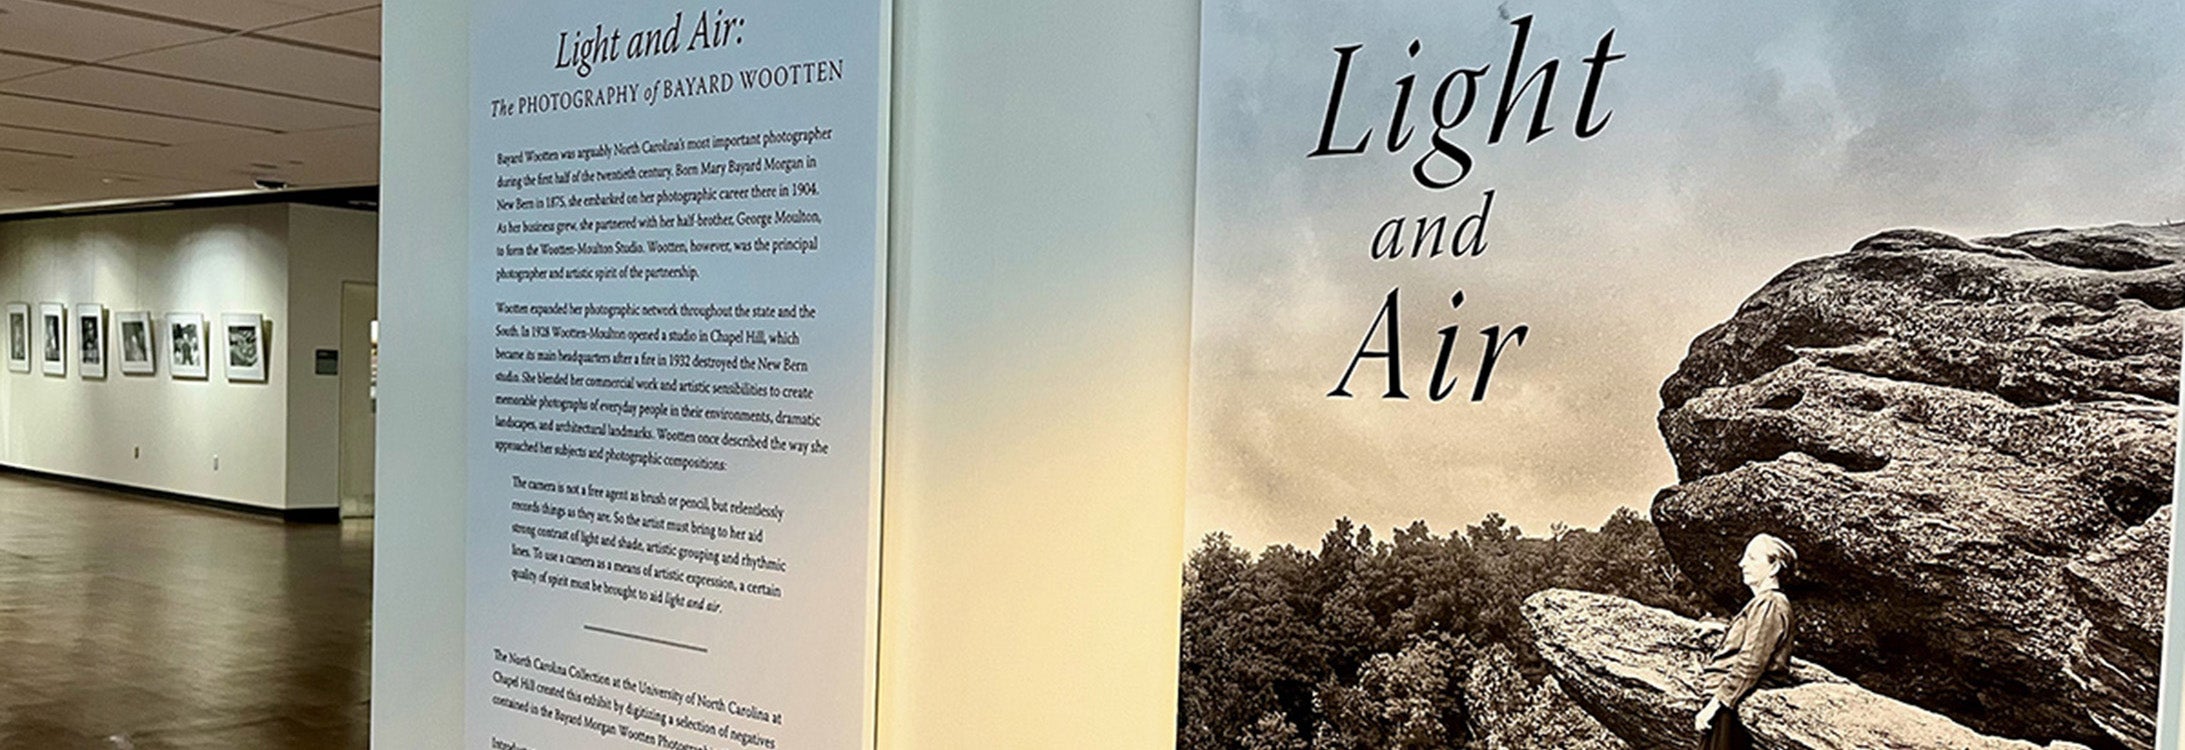 “Light and Air” is on display in the Janice Hardison Faulkner Gallery on the second floor of the library through May 15. (Photos by Ronnie Woodward)